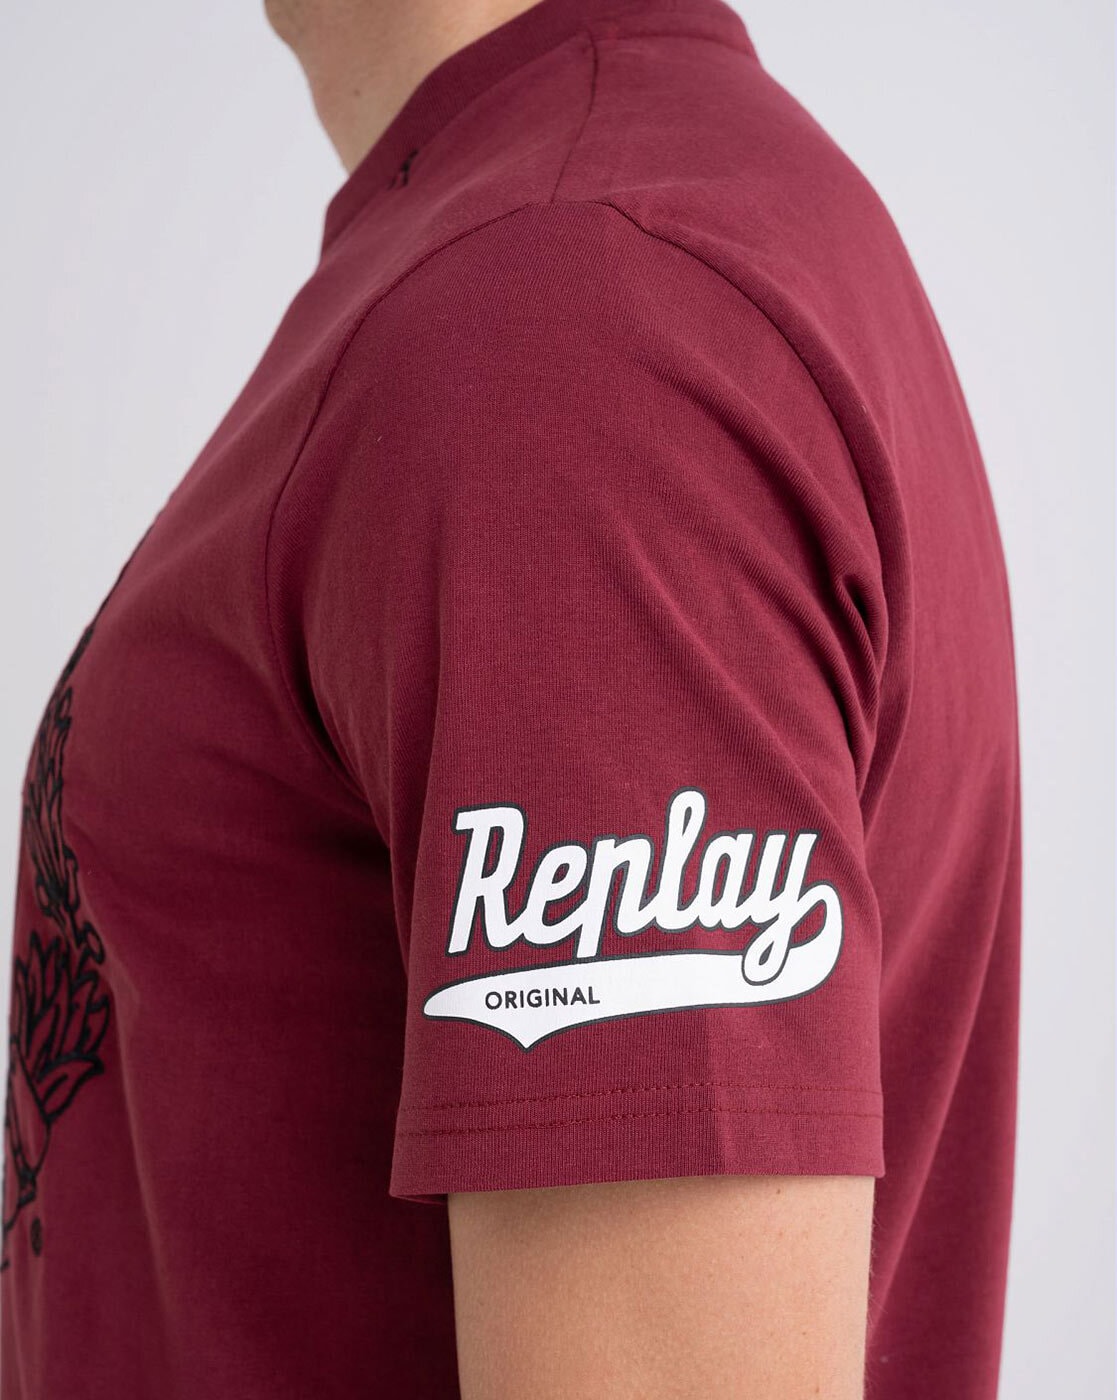 REDBAT Brand T-Shirts for Effortless Style